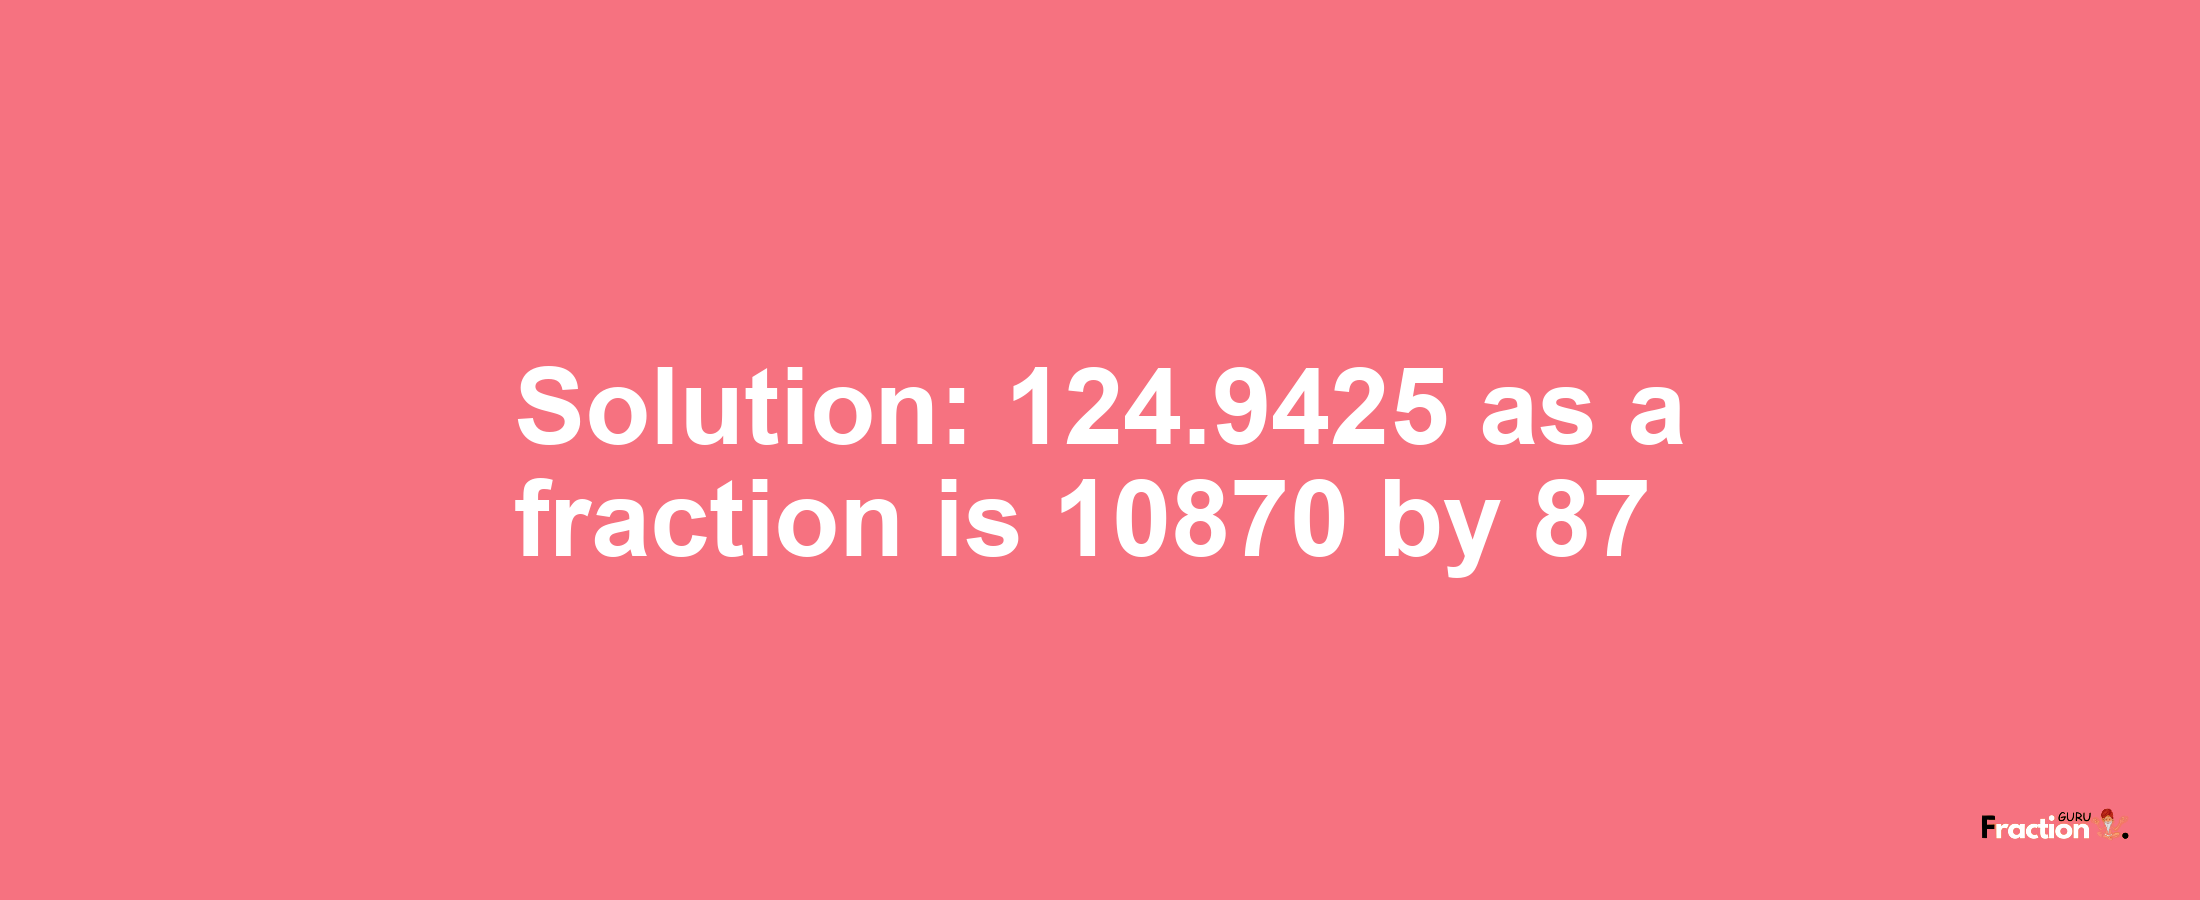 Solution:124.9425 as a fraction is 10870/87